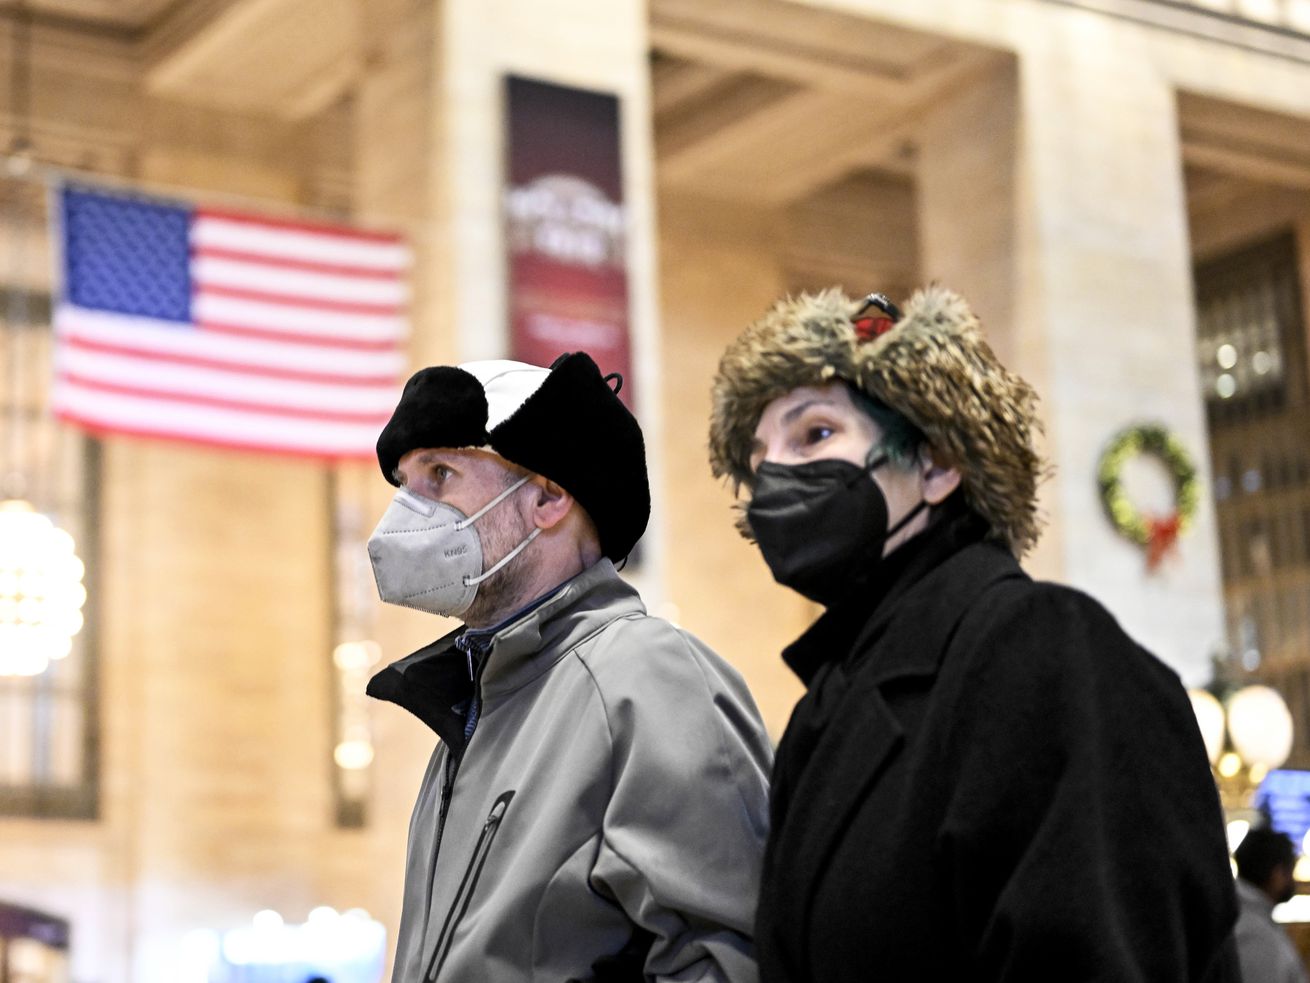 Masked pedestrians walk past a US flag in a streetfront window in New York City on December 12, 2022.